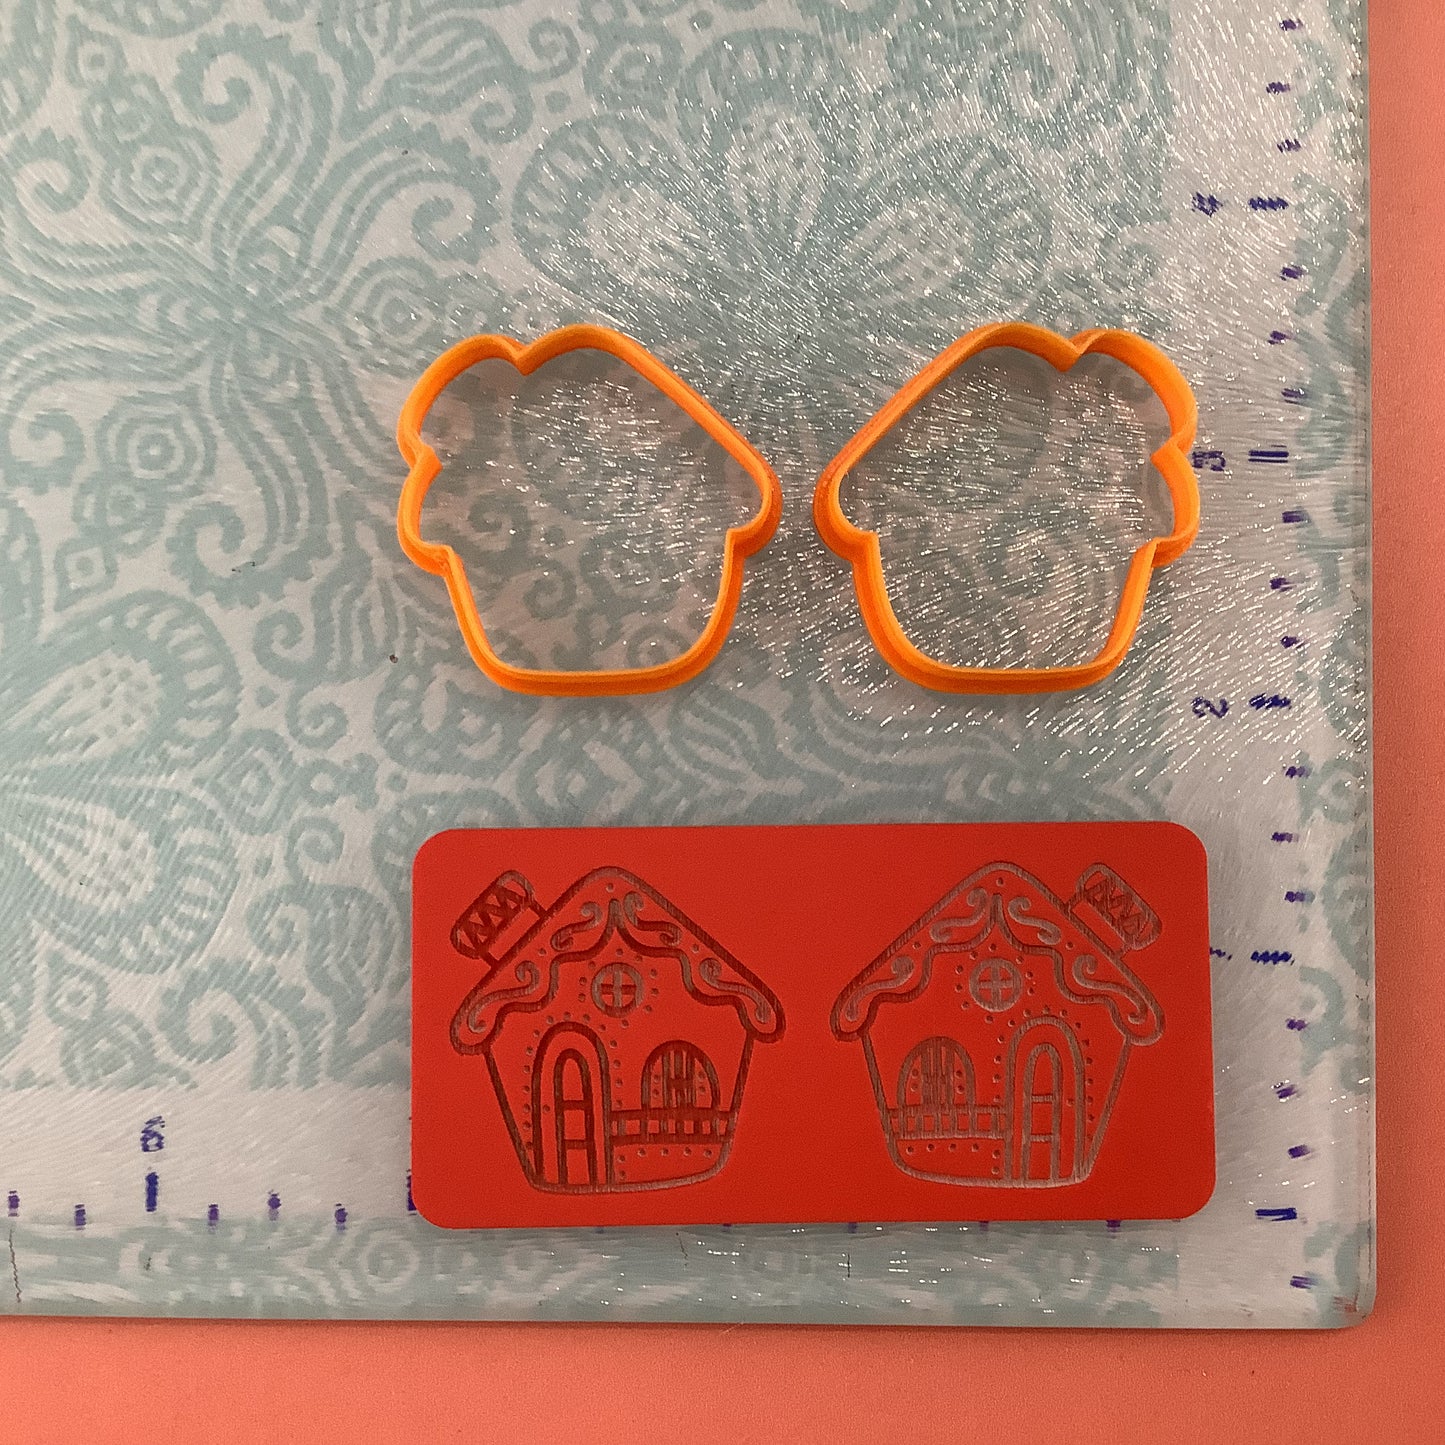 Gingerbread House clay Cutters and Stamp set # 2 mirrored pair